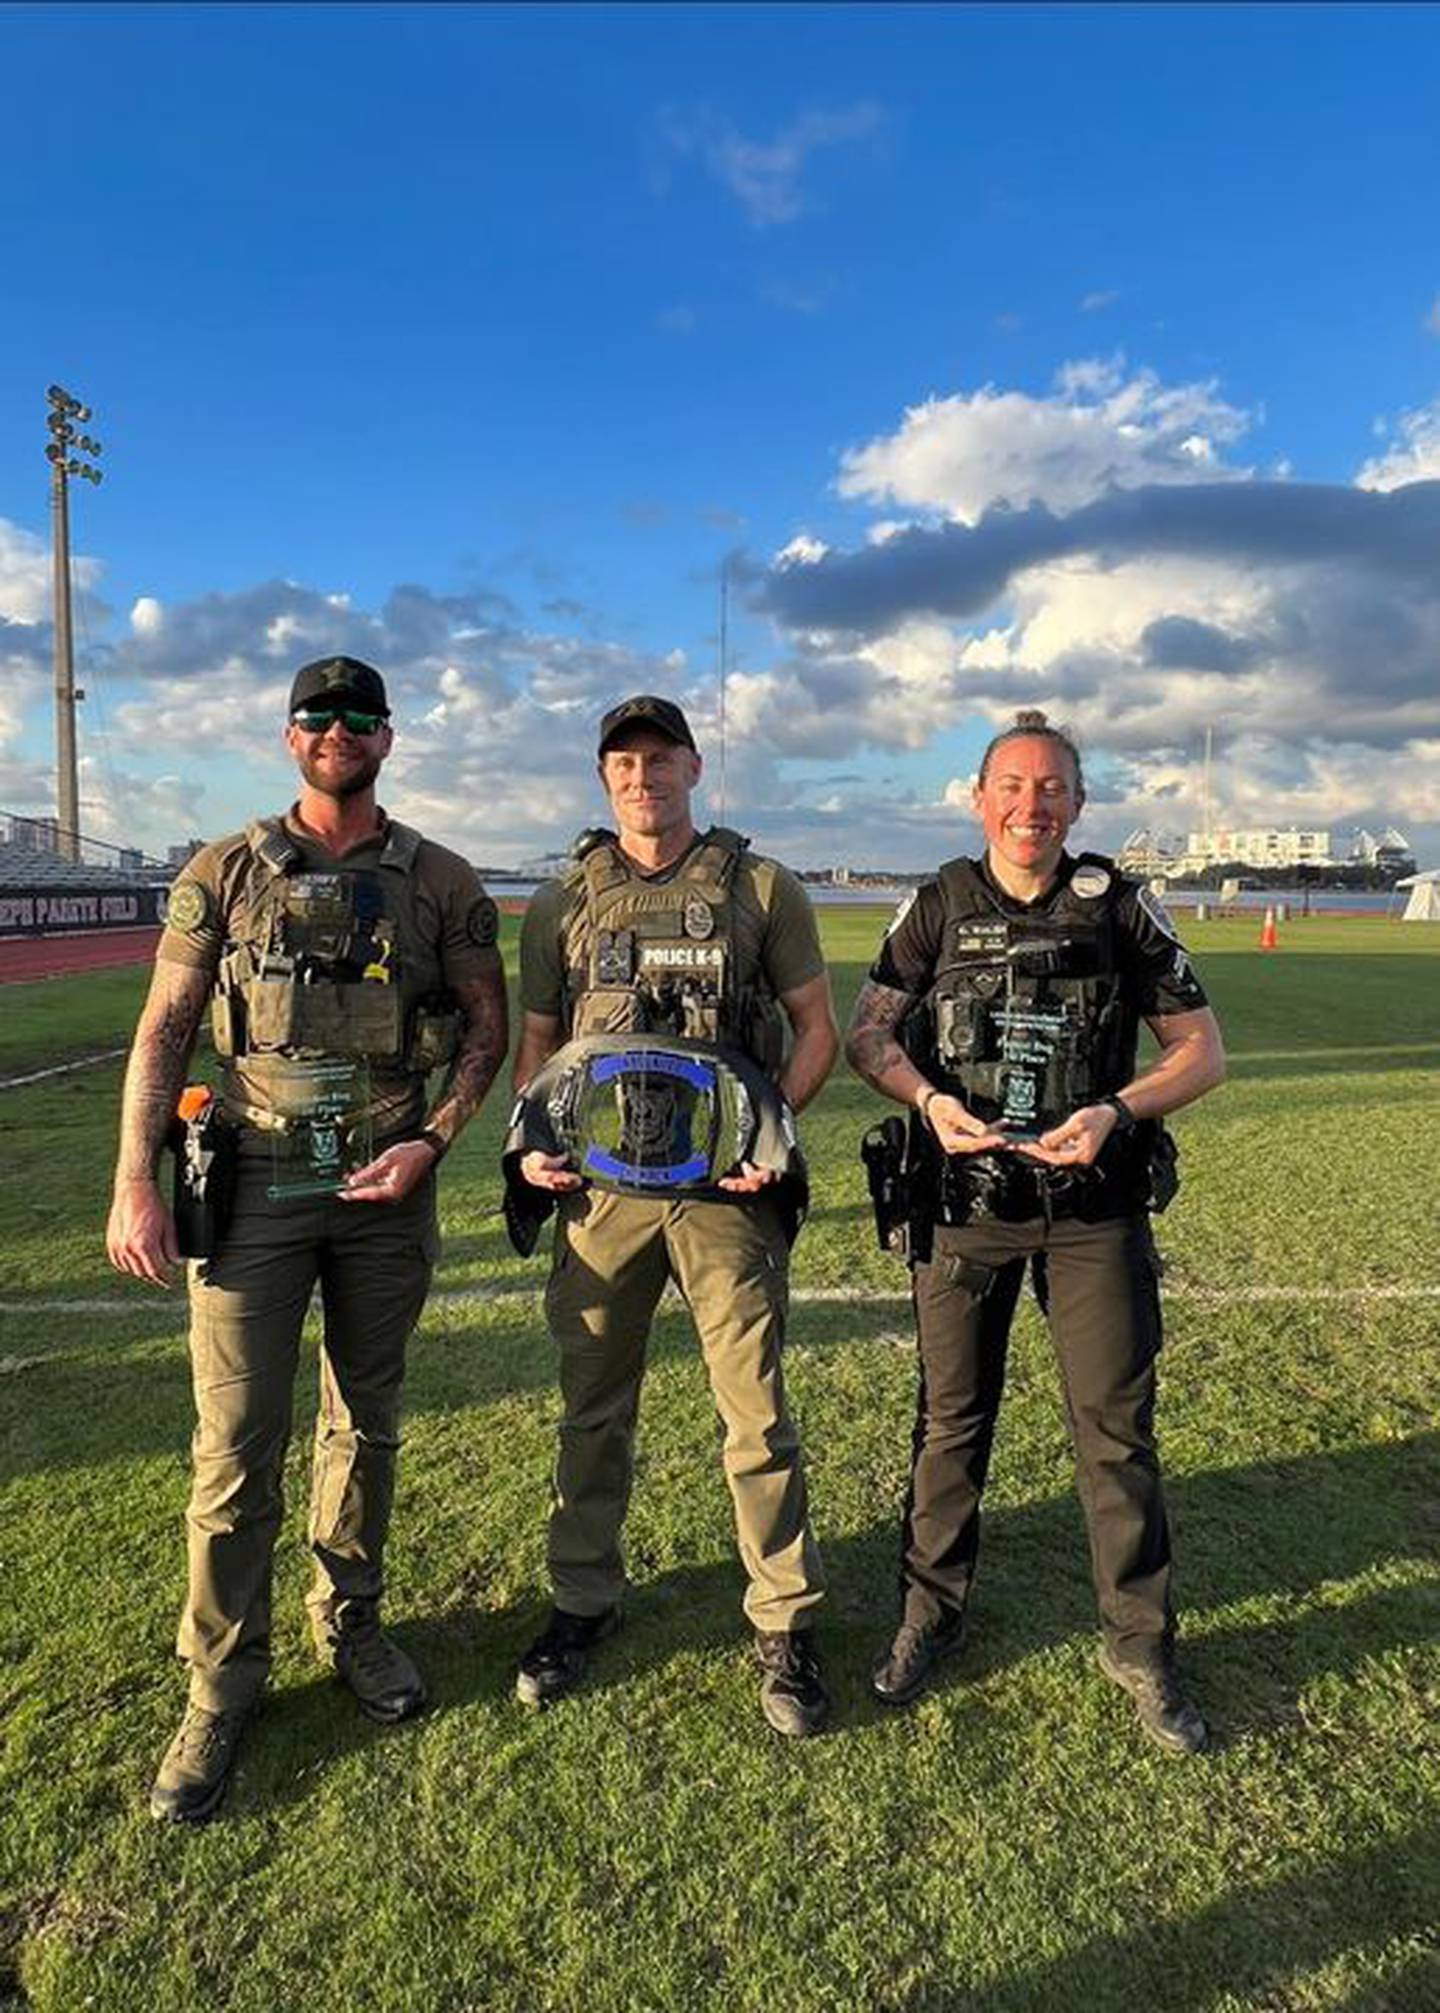 K9s United event winners included Scott Stevenson and K9 Tyr (JSO) for Top Dog, Matt Waddington and K9 Cairo (CCSO) for obstacle, Casey Walsh and K9 Stern (Gainesville PD) for fastest dog, and Logan Schrock and K9 Junior (SJSO) for hardest dog.